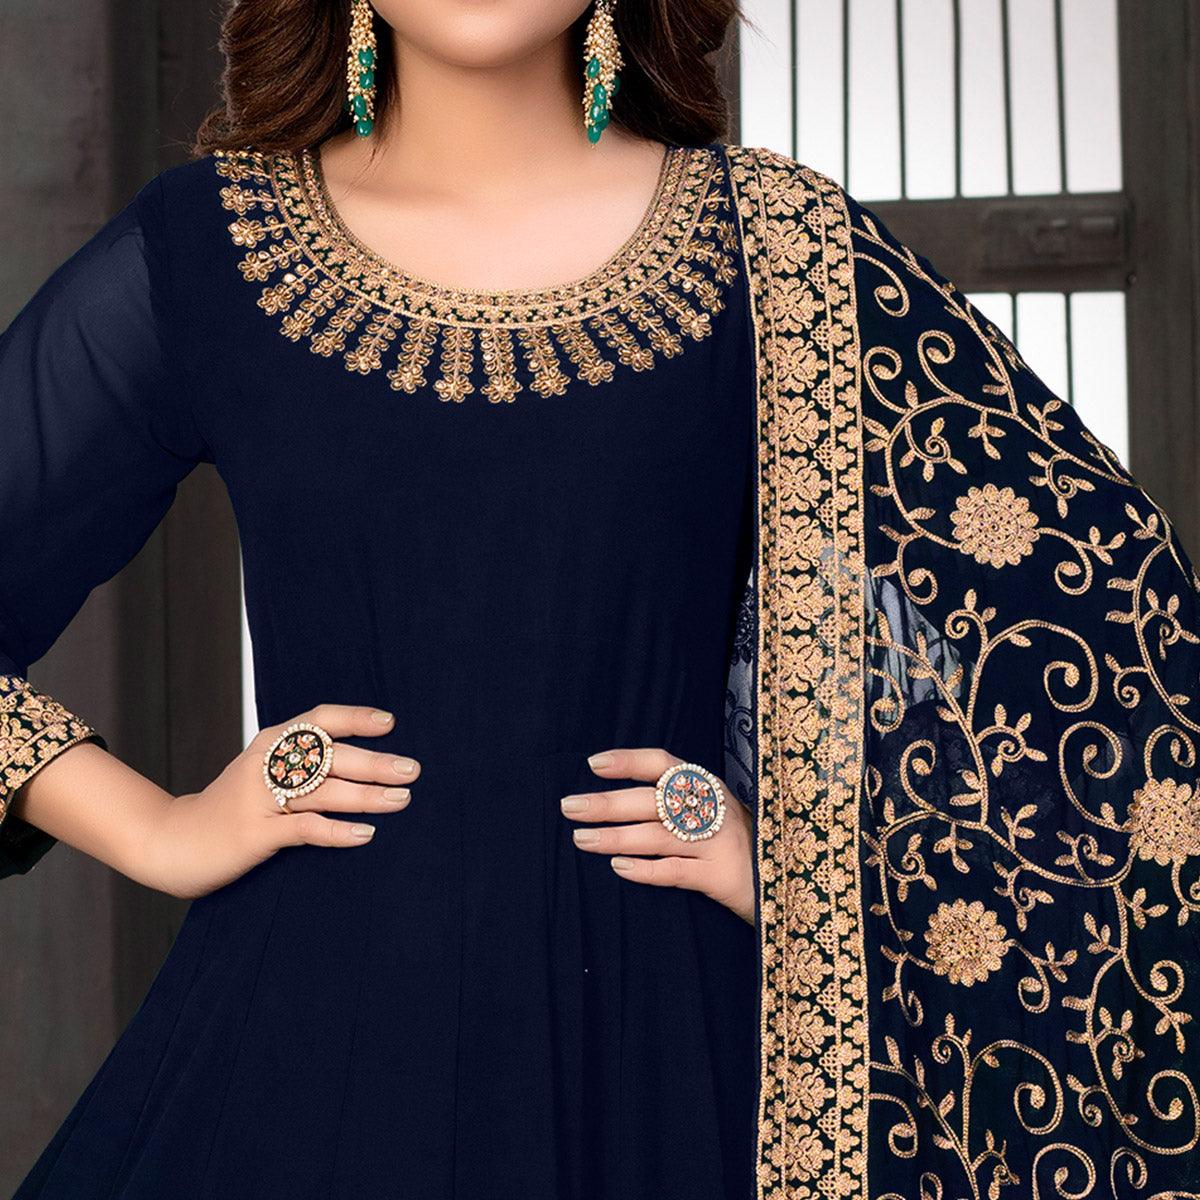 Blue Partywear Embroidered Georgette Anarkali Suit - Peachmode